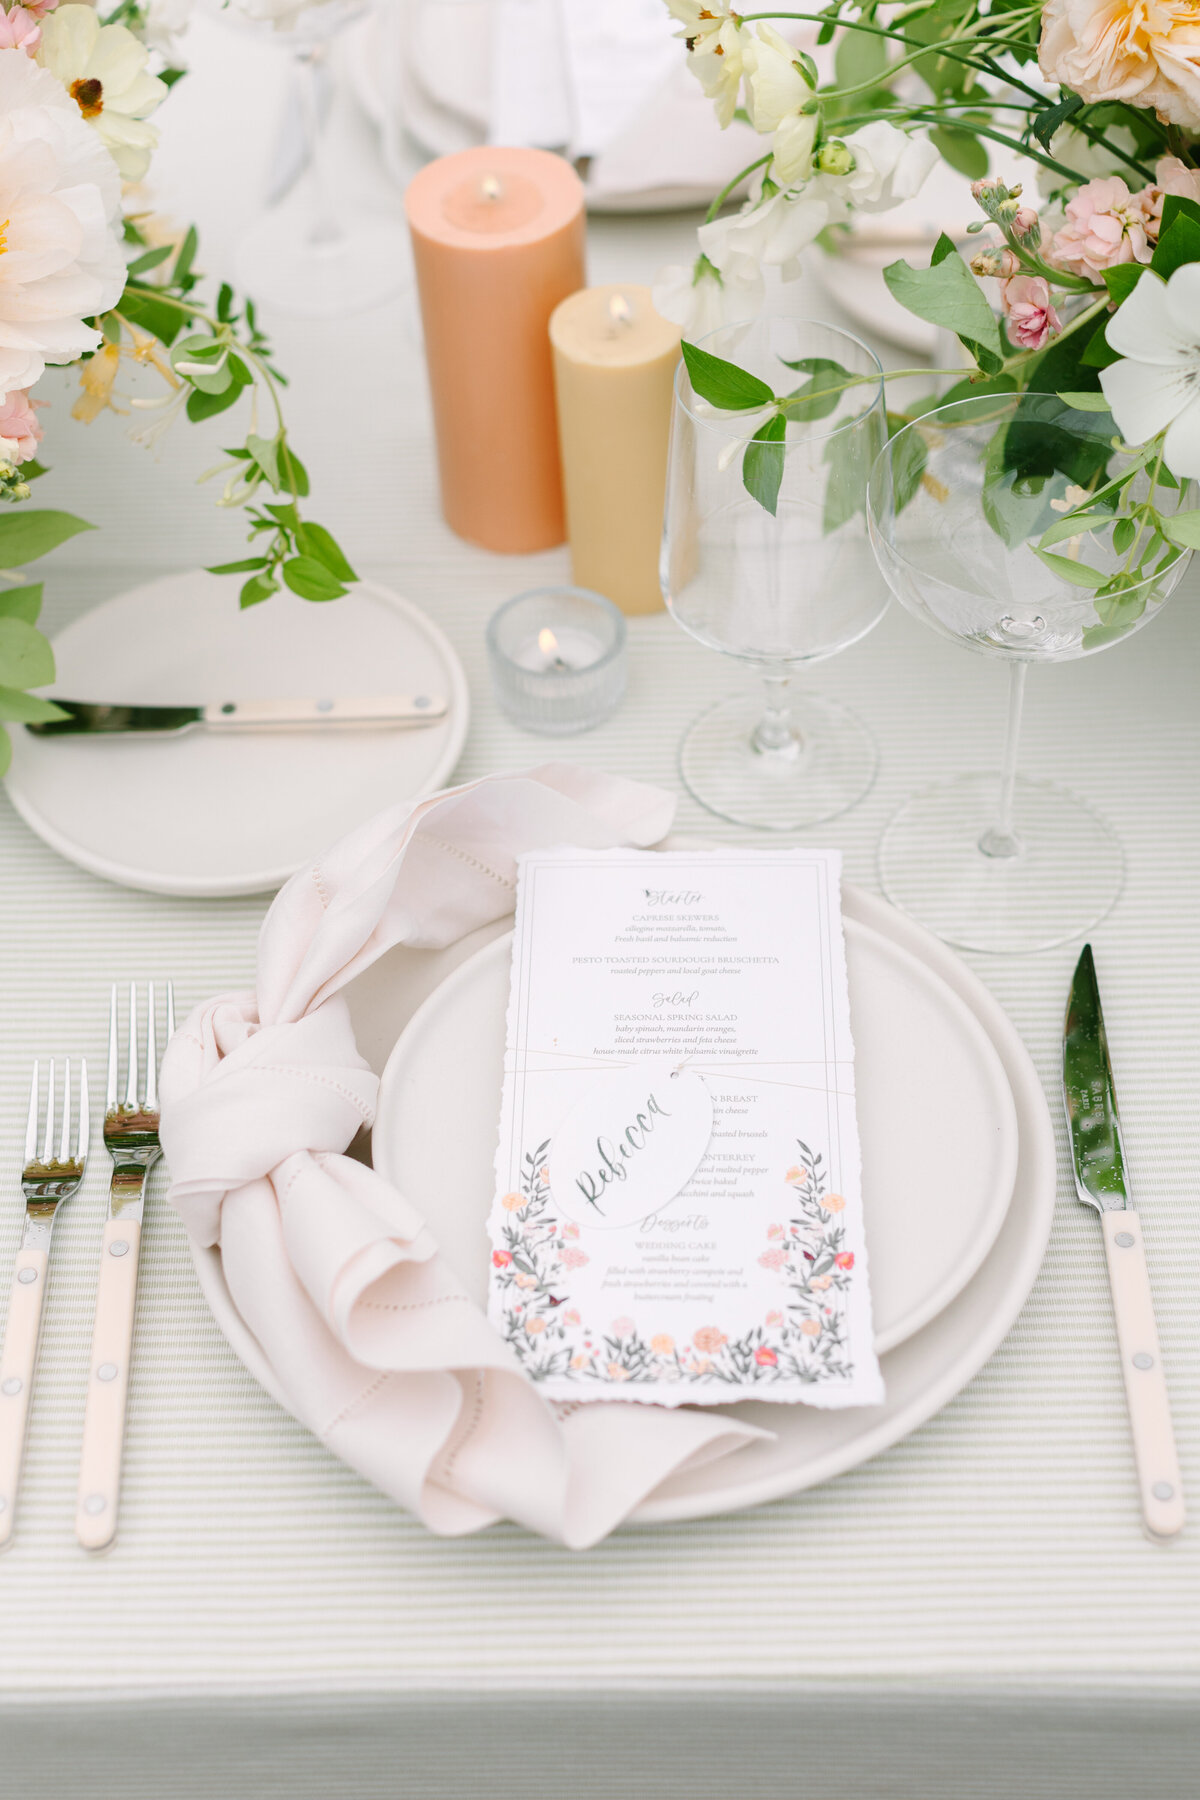 wedding tablescape with dinner menu, peach candles, and loose floral bouquets.